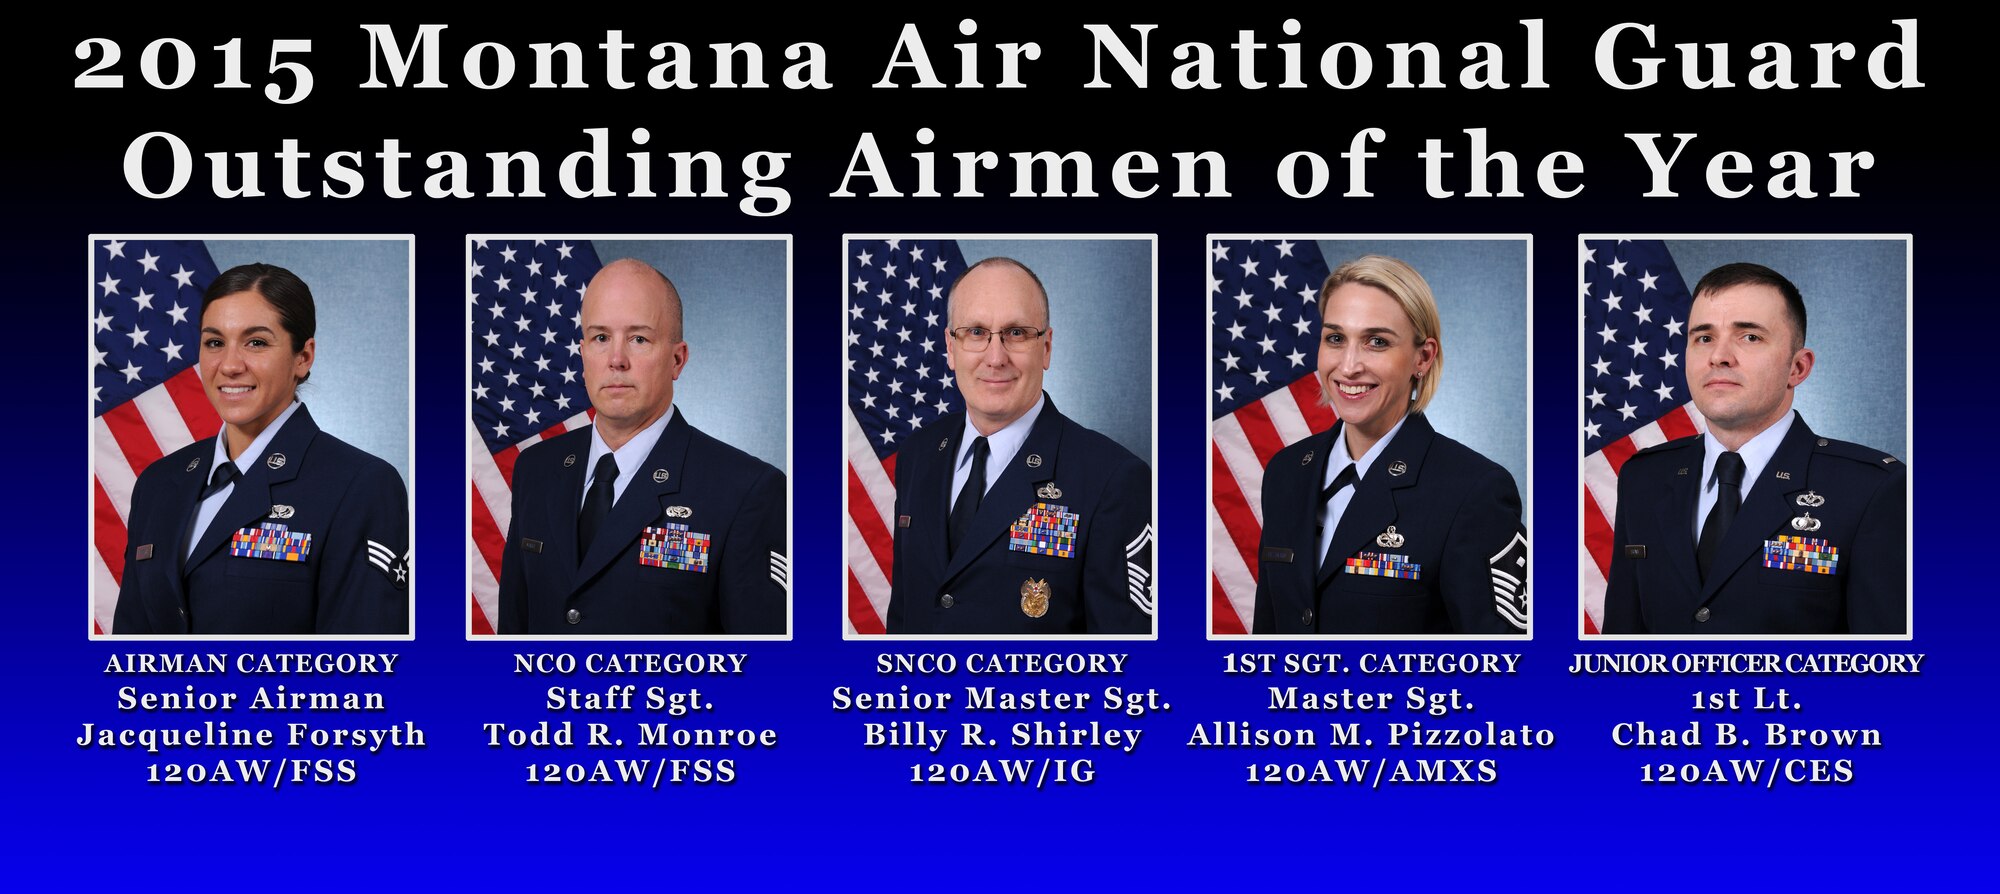 The 2015 Montana Air National Guard  Airmen of the Year as shown in this photo illustration: Senior Airman Jacqueline Forsyth, 120th Force Support Squadron, Airman category; Staff Sgt. Todd Monroe, 120th Force Support Squadron, non-commissioned officer category; Senior Master Sgt. Billy Shirley, 120th Airlift Wing Inspector General, senior non-commissioned officer category; Master Sgt. Allison Pizzolato, 120th Aircraft Maintenance Squadron, first sergeant category; and 1st Lt. Chad Brown, 120th Civil Engineer Squadron, junior officer category. (U.S. Air National Guard photo illustration by Senior Master Sgt. Eric Peterson/Released)